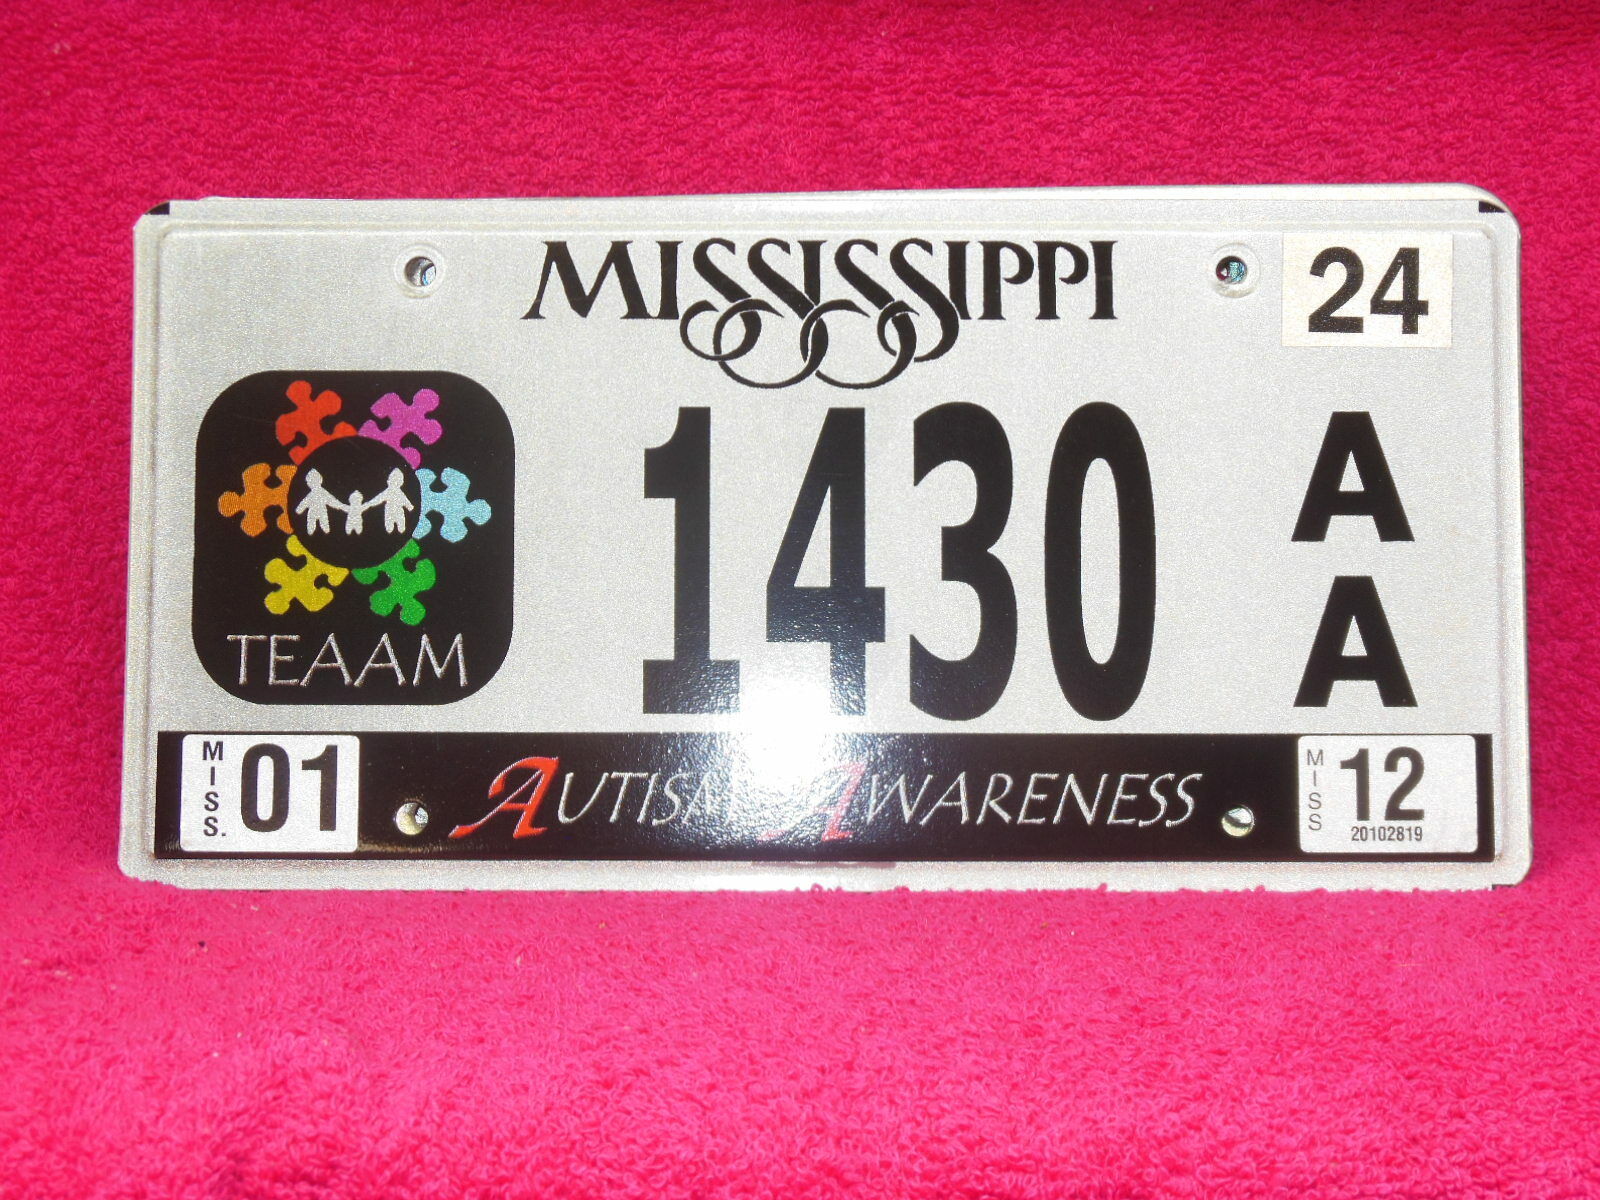 1430 AA = January 2012 Mississippi Autism Awareness License Plate 